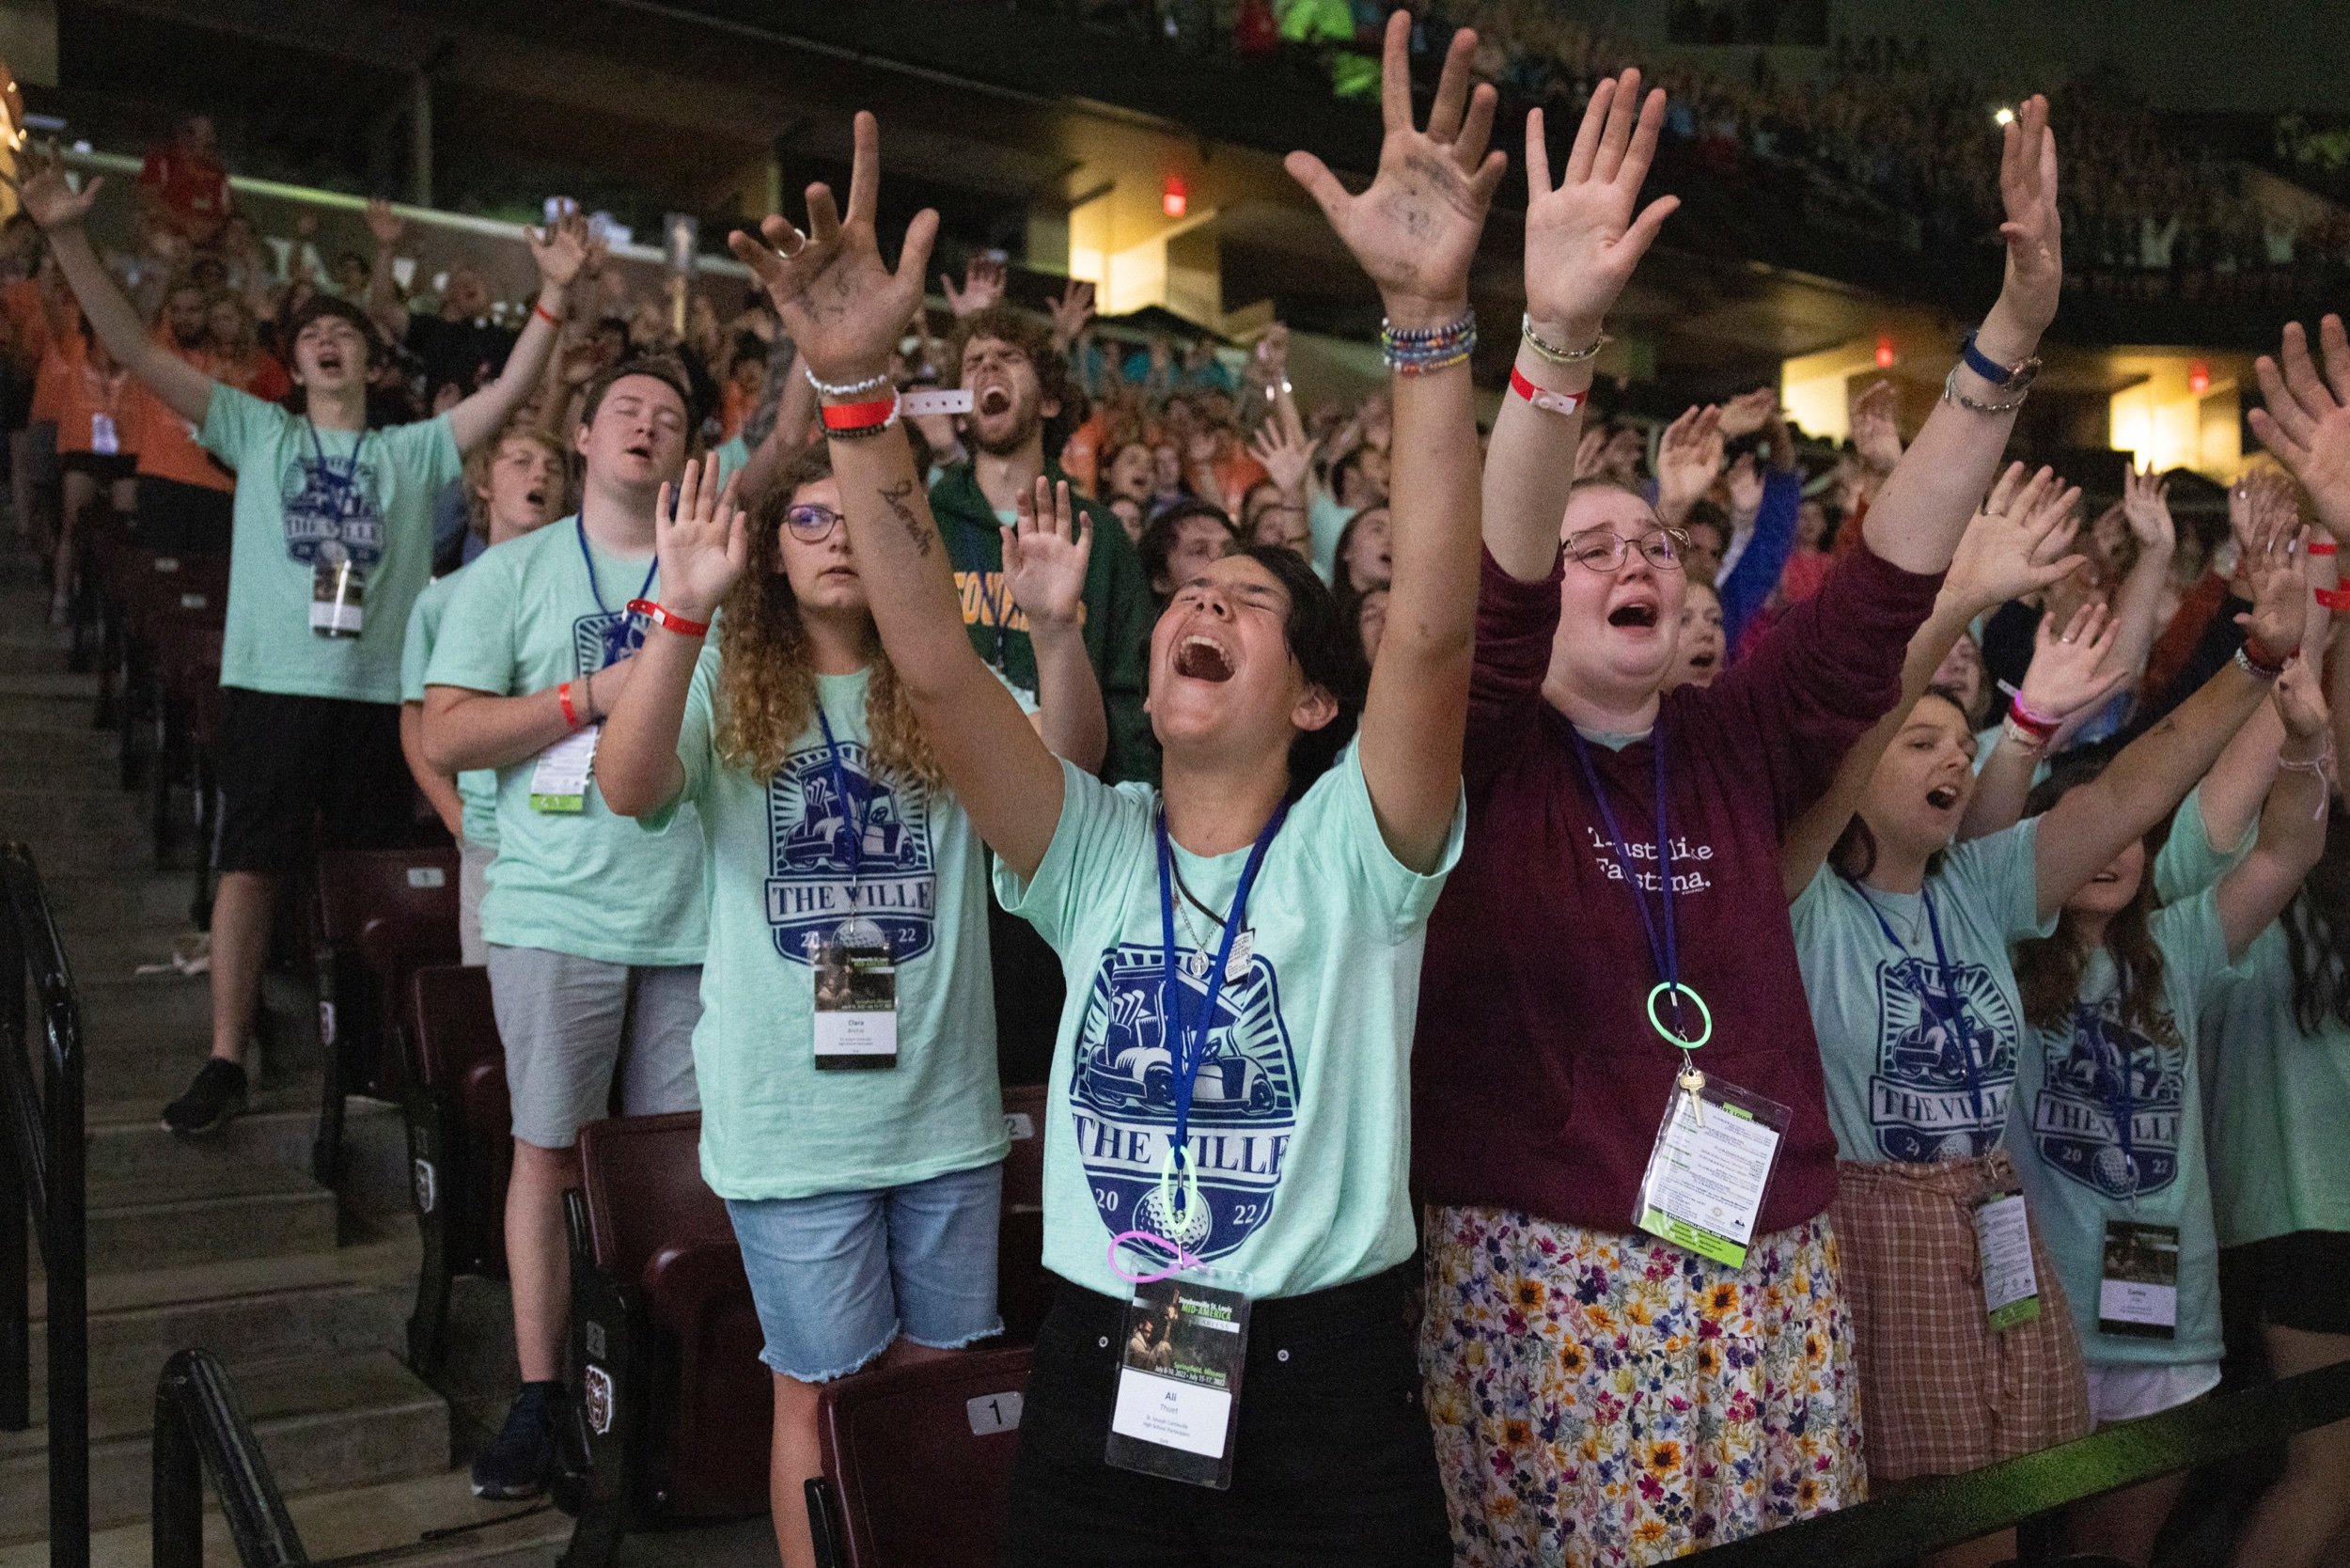  Ali Thuet raised arms in worship during week two of the Steubenville STL Mid-America youth conference July 16 at the Great Southern Bank Arena in Springfield, Missouri. About 3,300 people attended the second weekend of the Catholic youth conference 